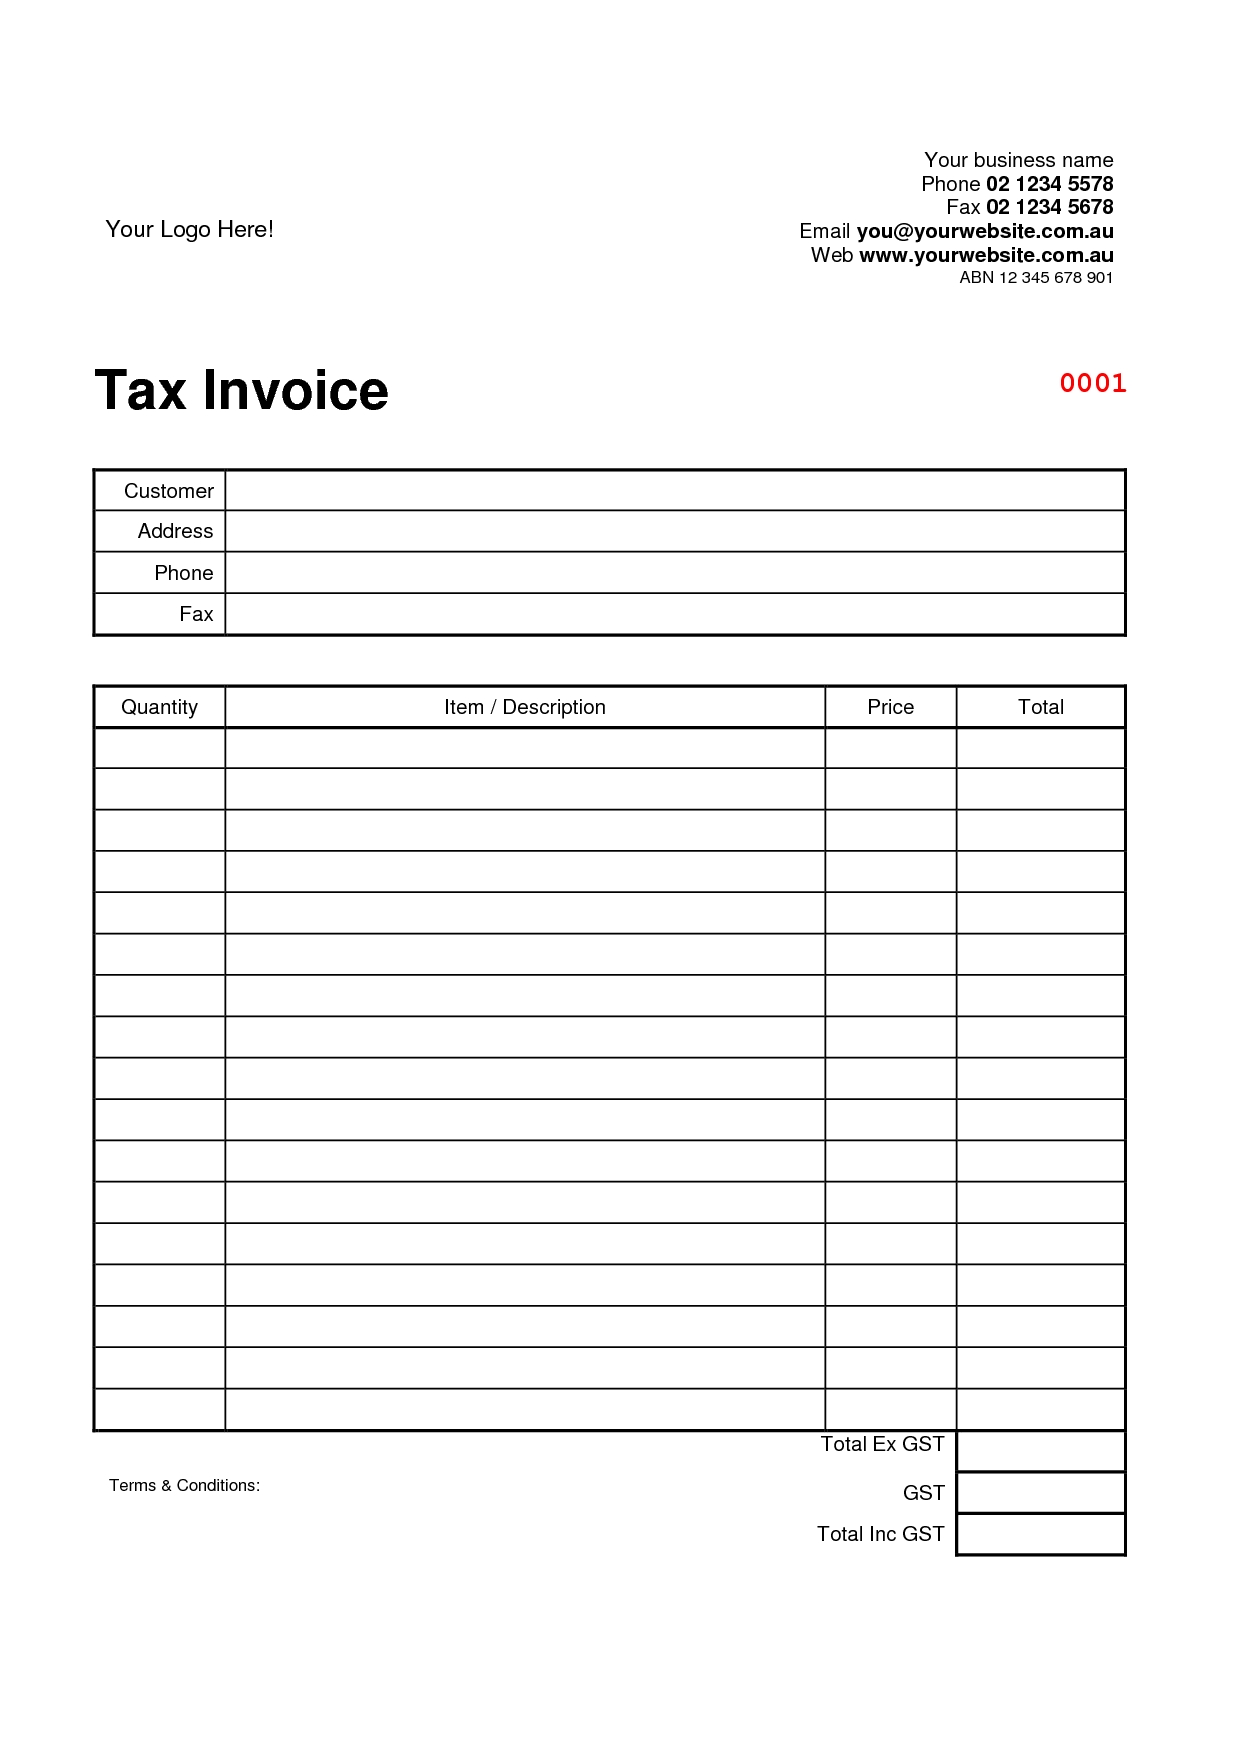 tax invoice format direct download vat invoice format